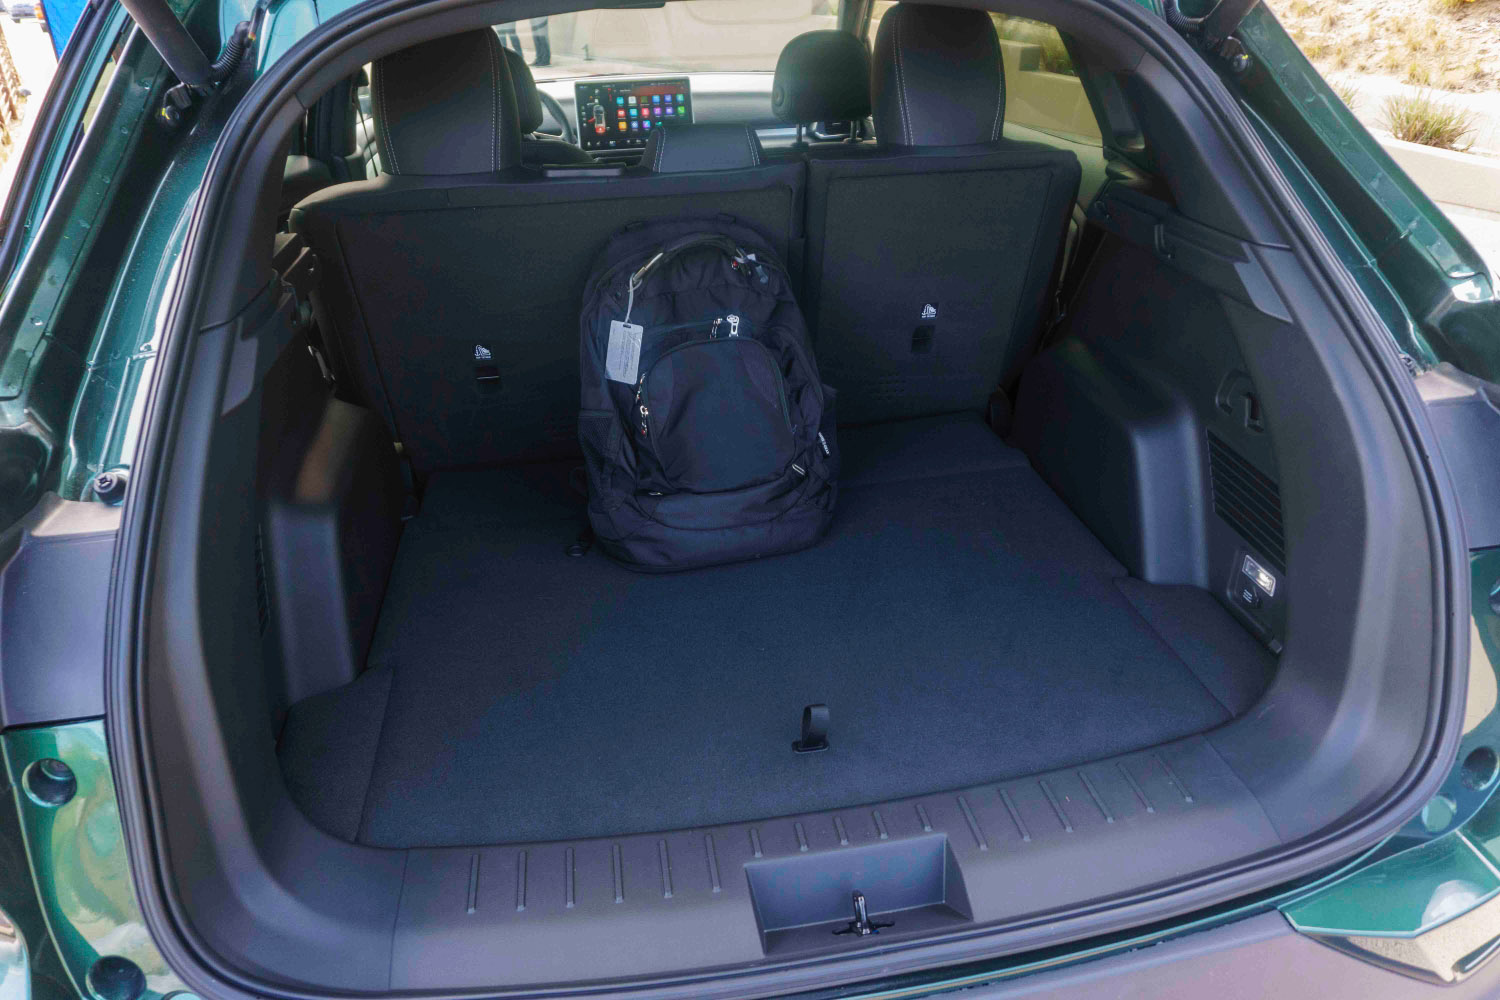 : 2023 Vinfast VF 8 interior, rear cargo area with backpack inside